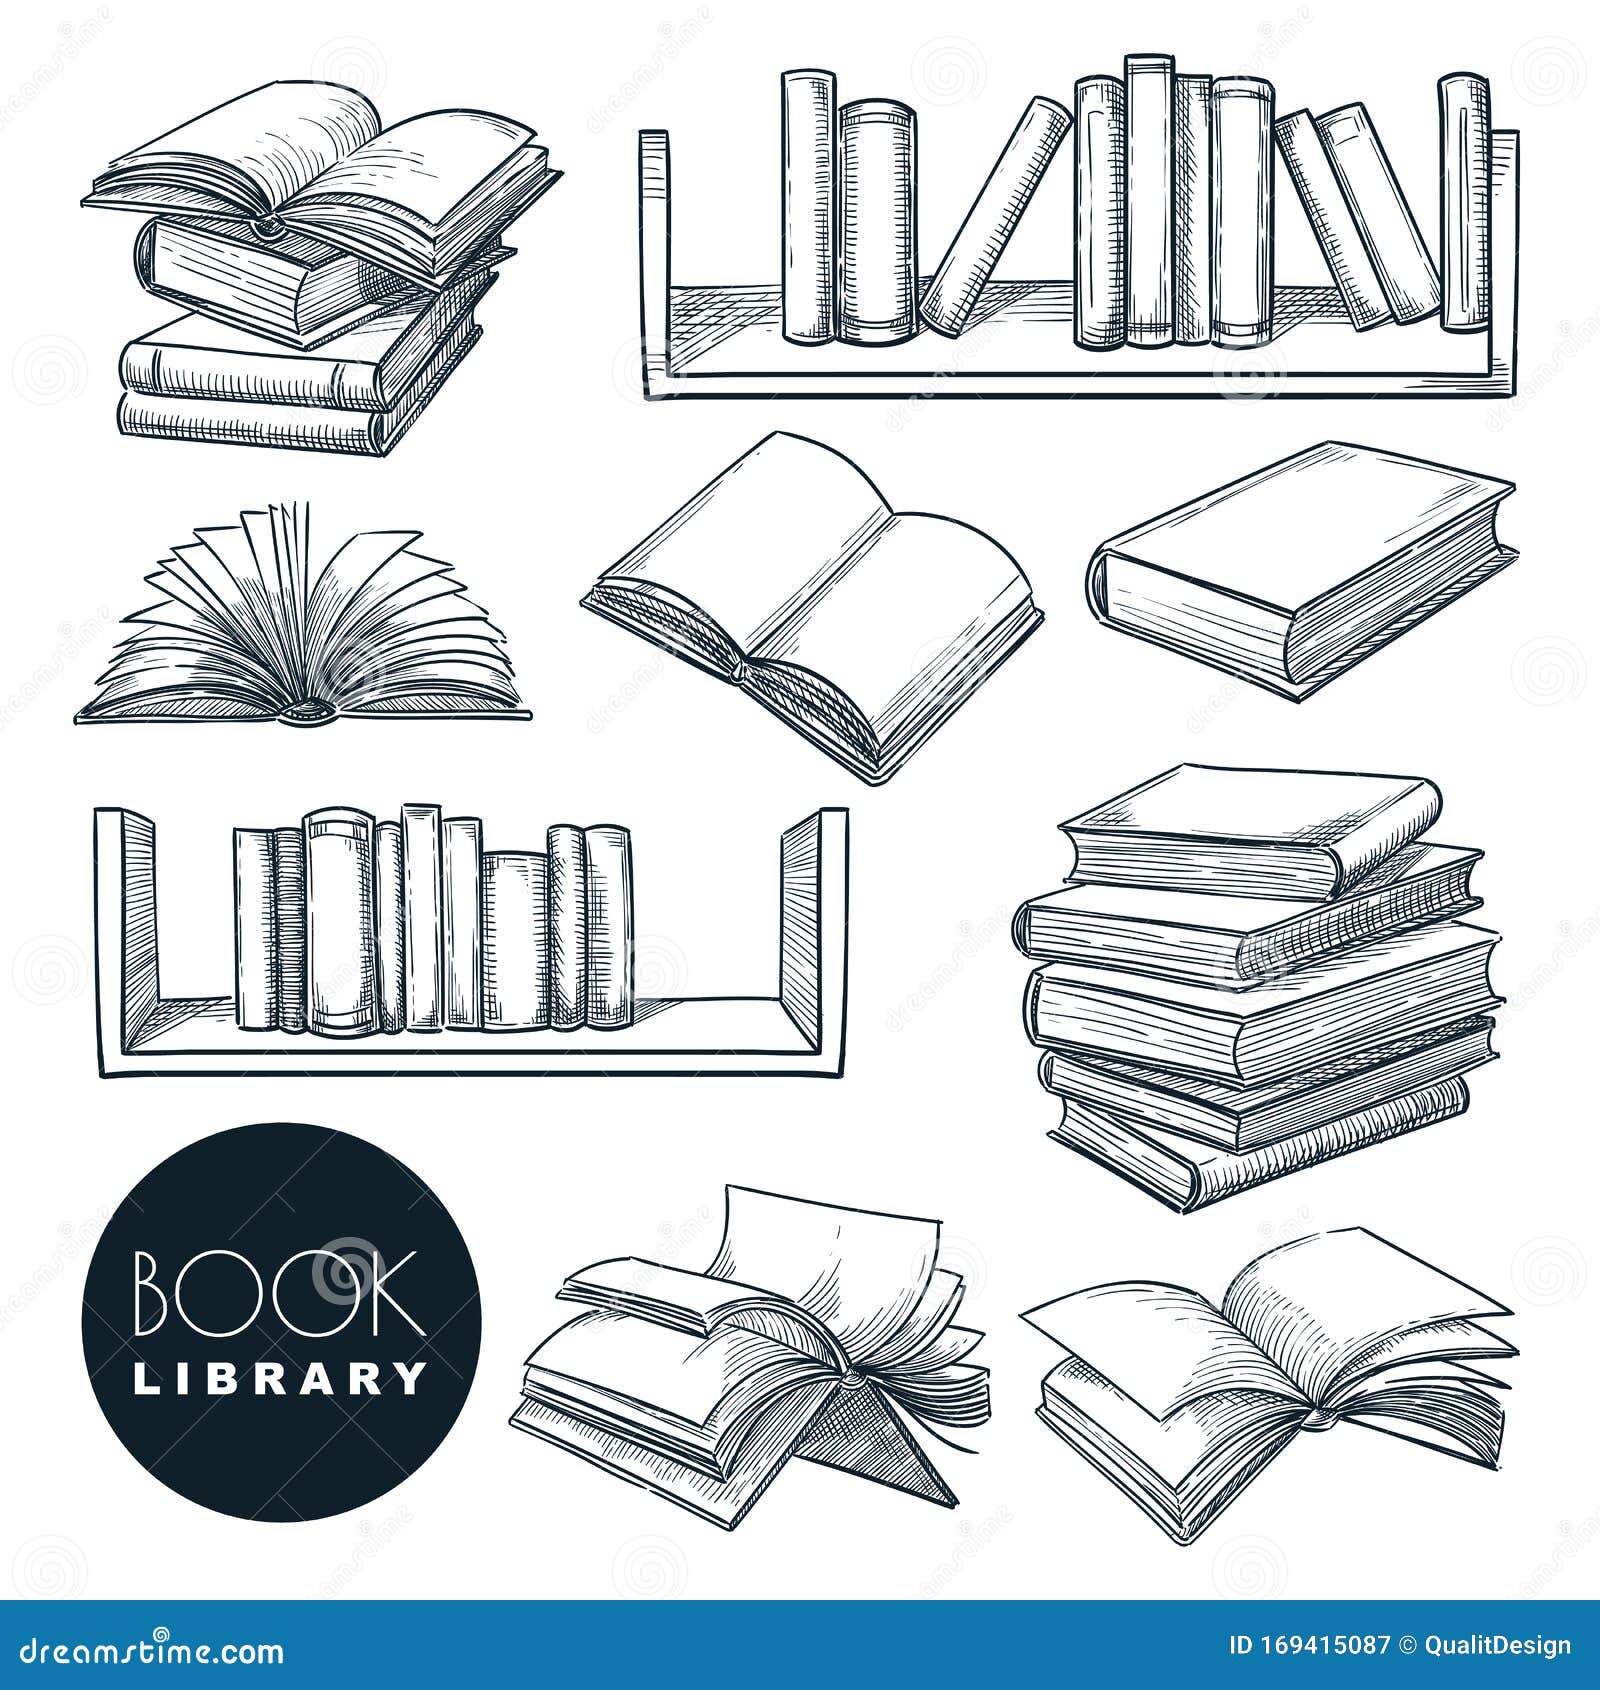 https://thumbs.dreamstime.com/z/paper-book-sketch-vector-illustration-isolated-hand-drawn-learning-education-icons-set-open-closed-books-collection-169415087.jpg